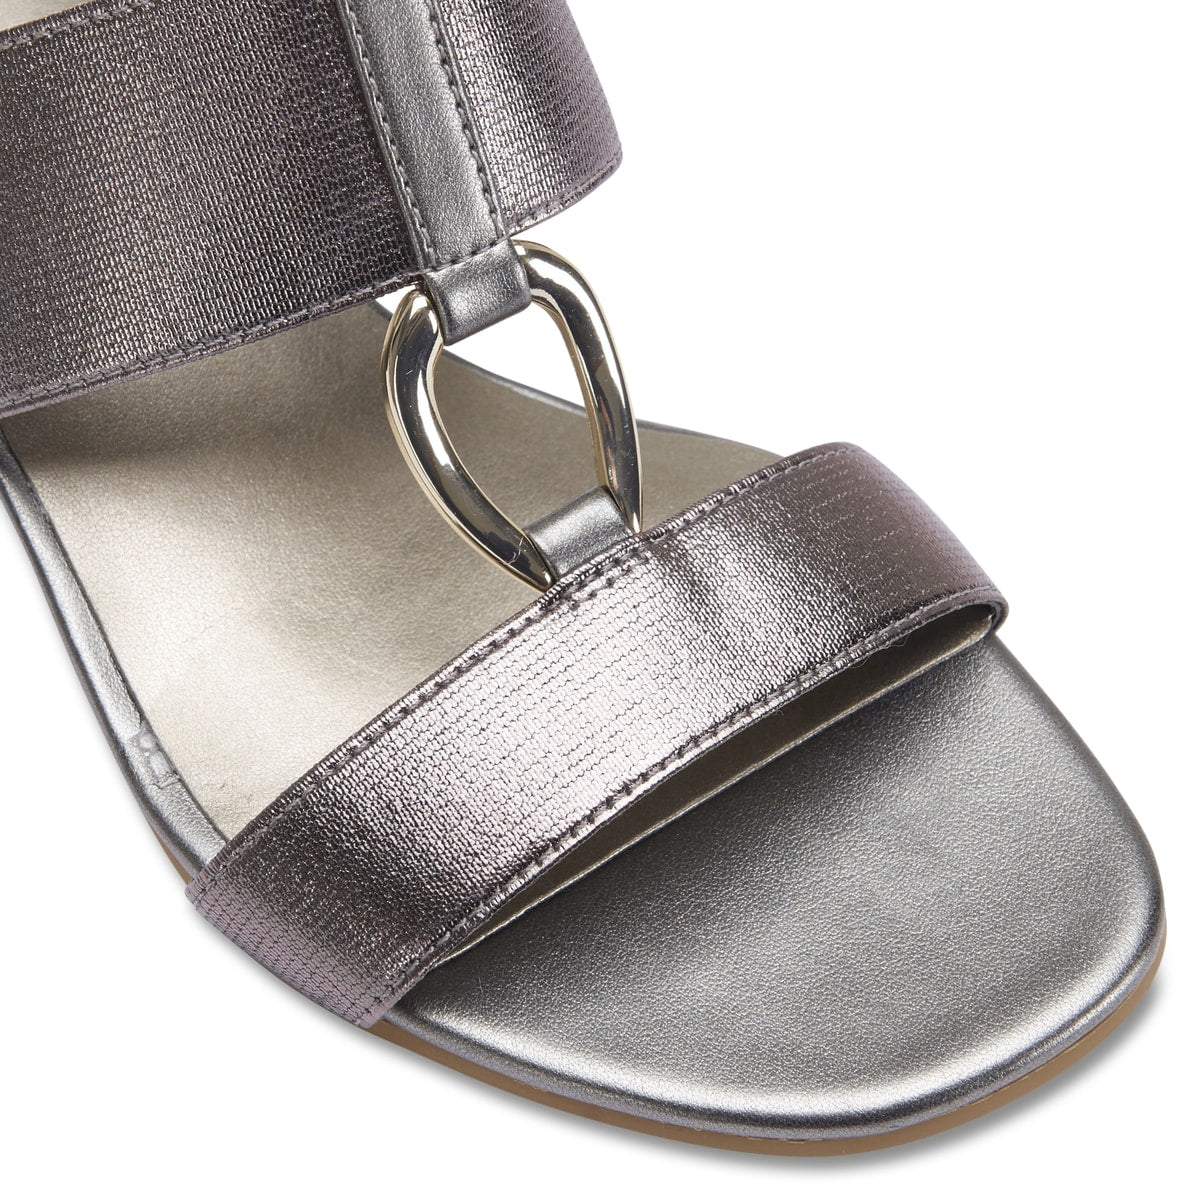 Claire Heel in Pewter Fabric